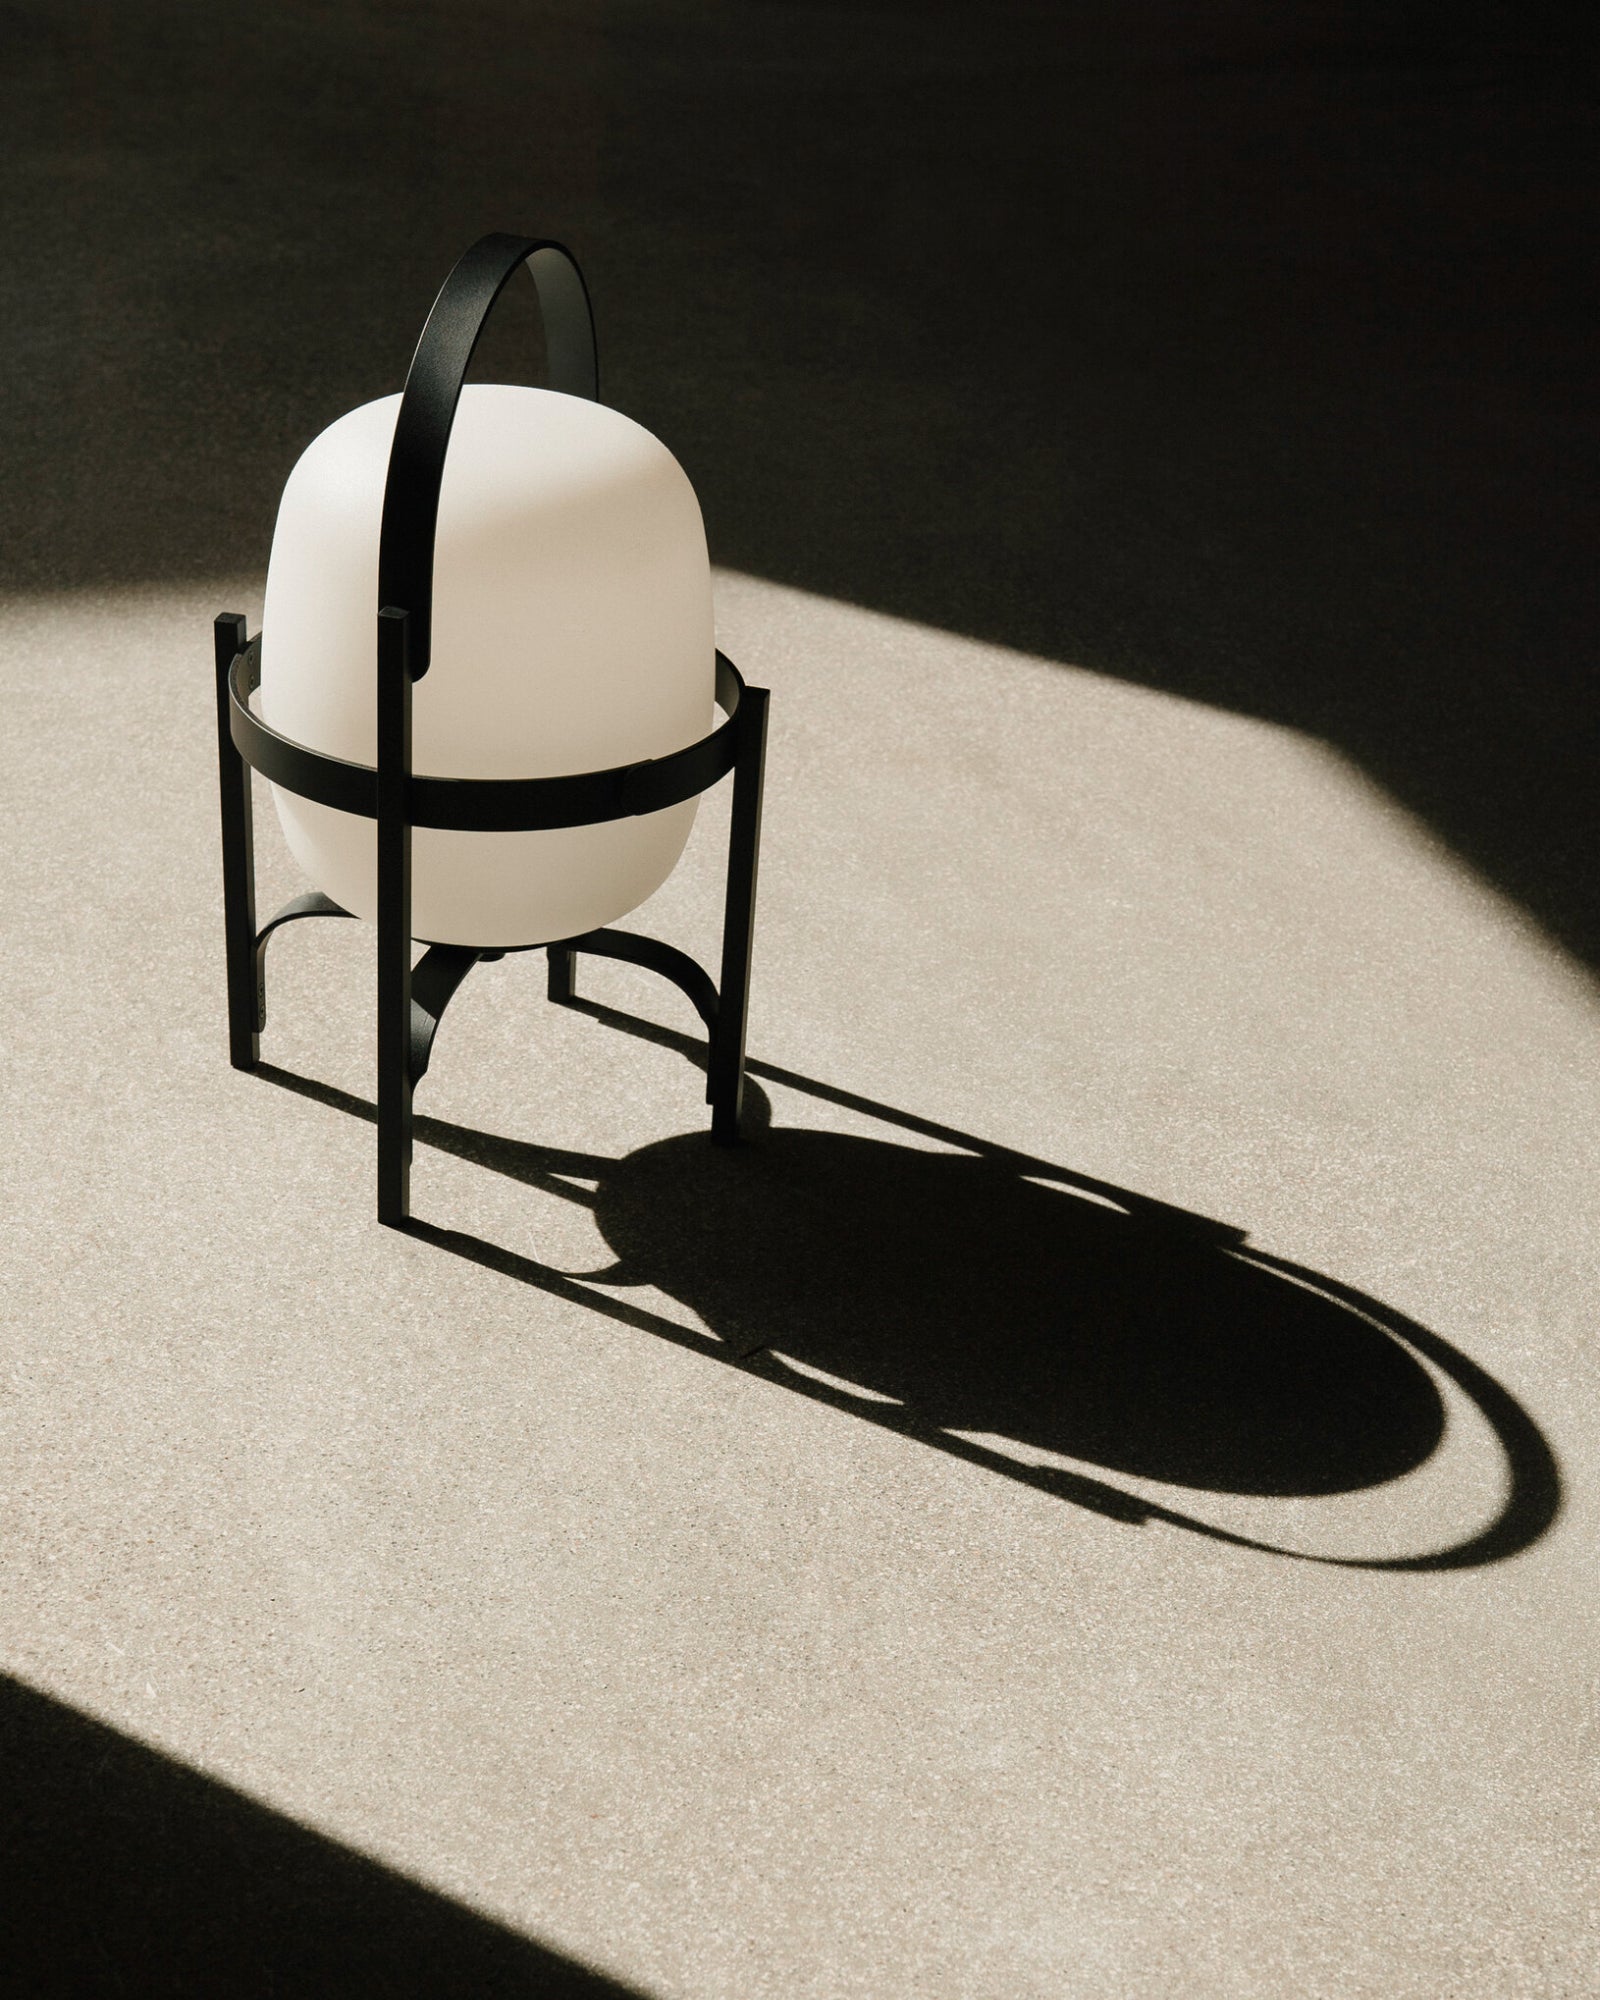 Contemporary table lamp called the Cestita Alubut Table Lamp in black finish by Santa & Cole featured